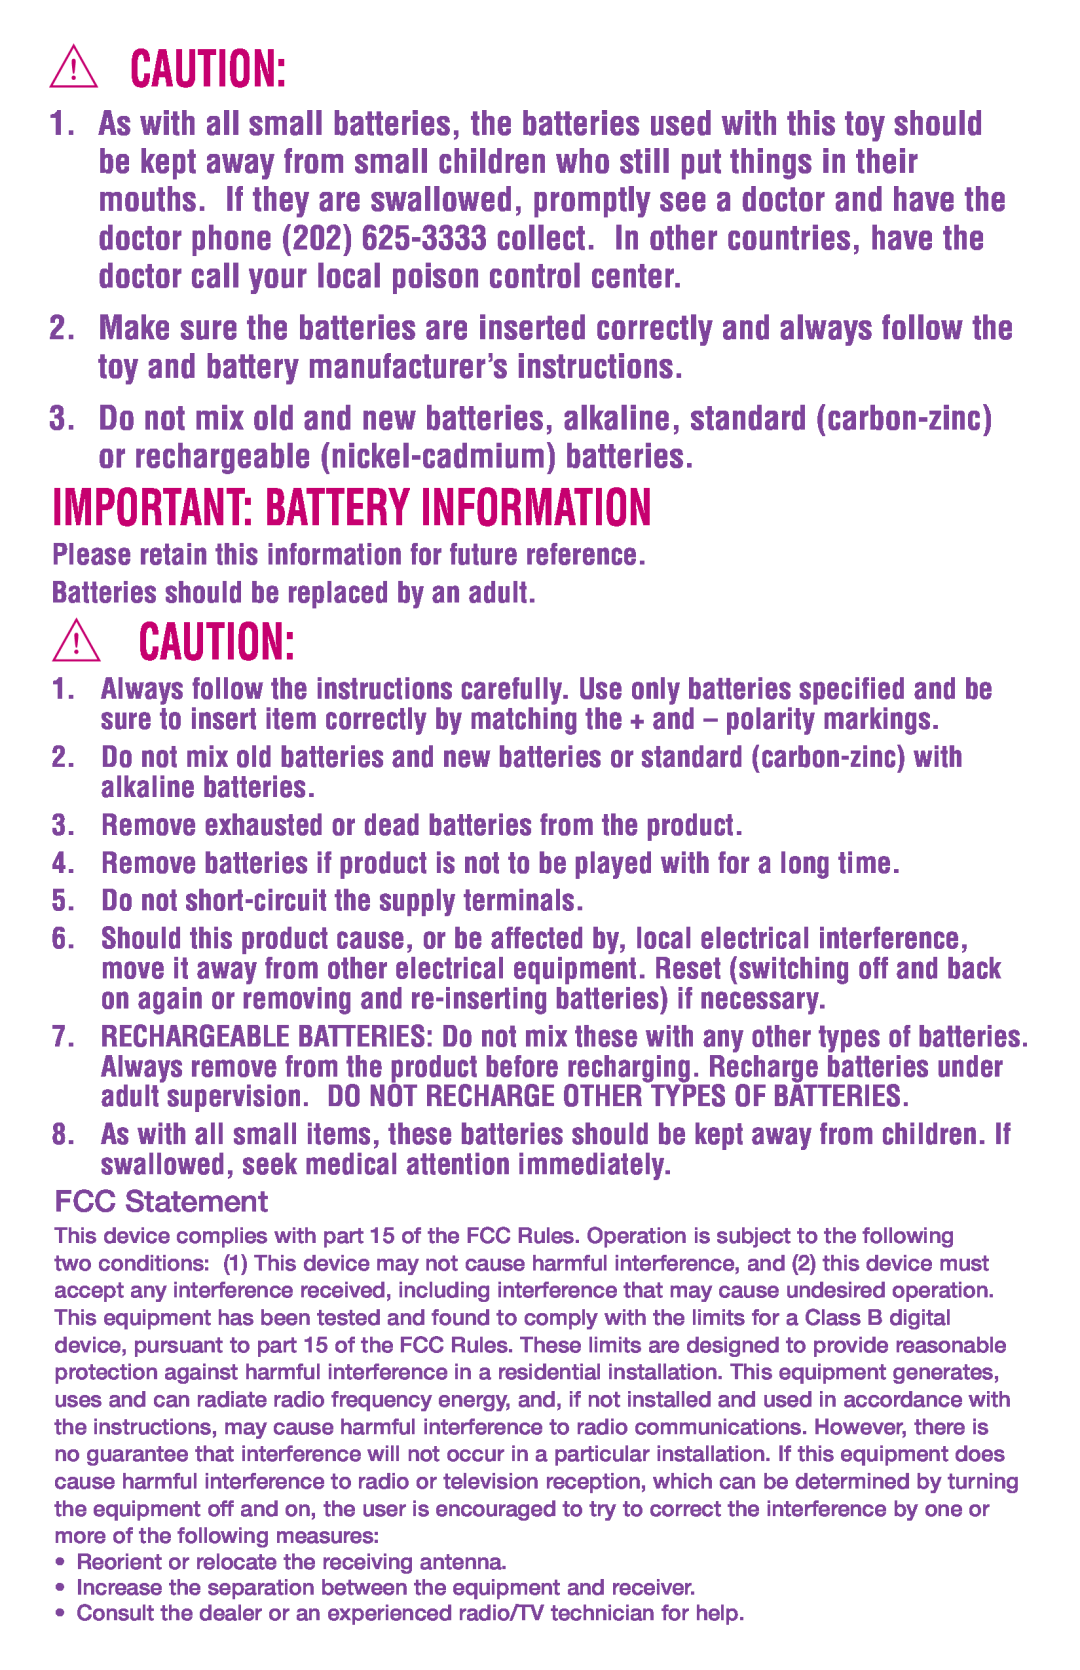 Hasbro 62321/62319, 62320 manual Important Battery Information, FCC Statement 